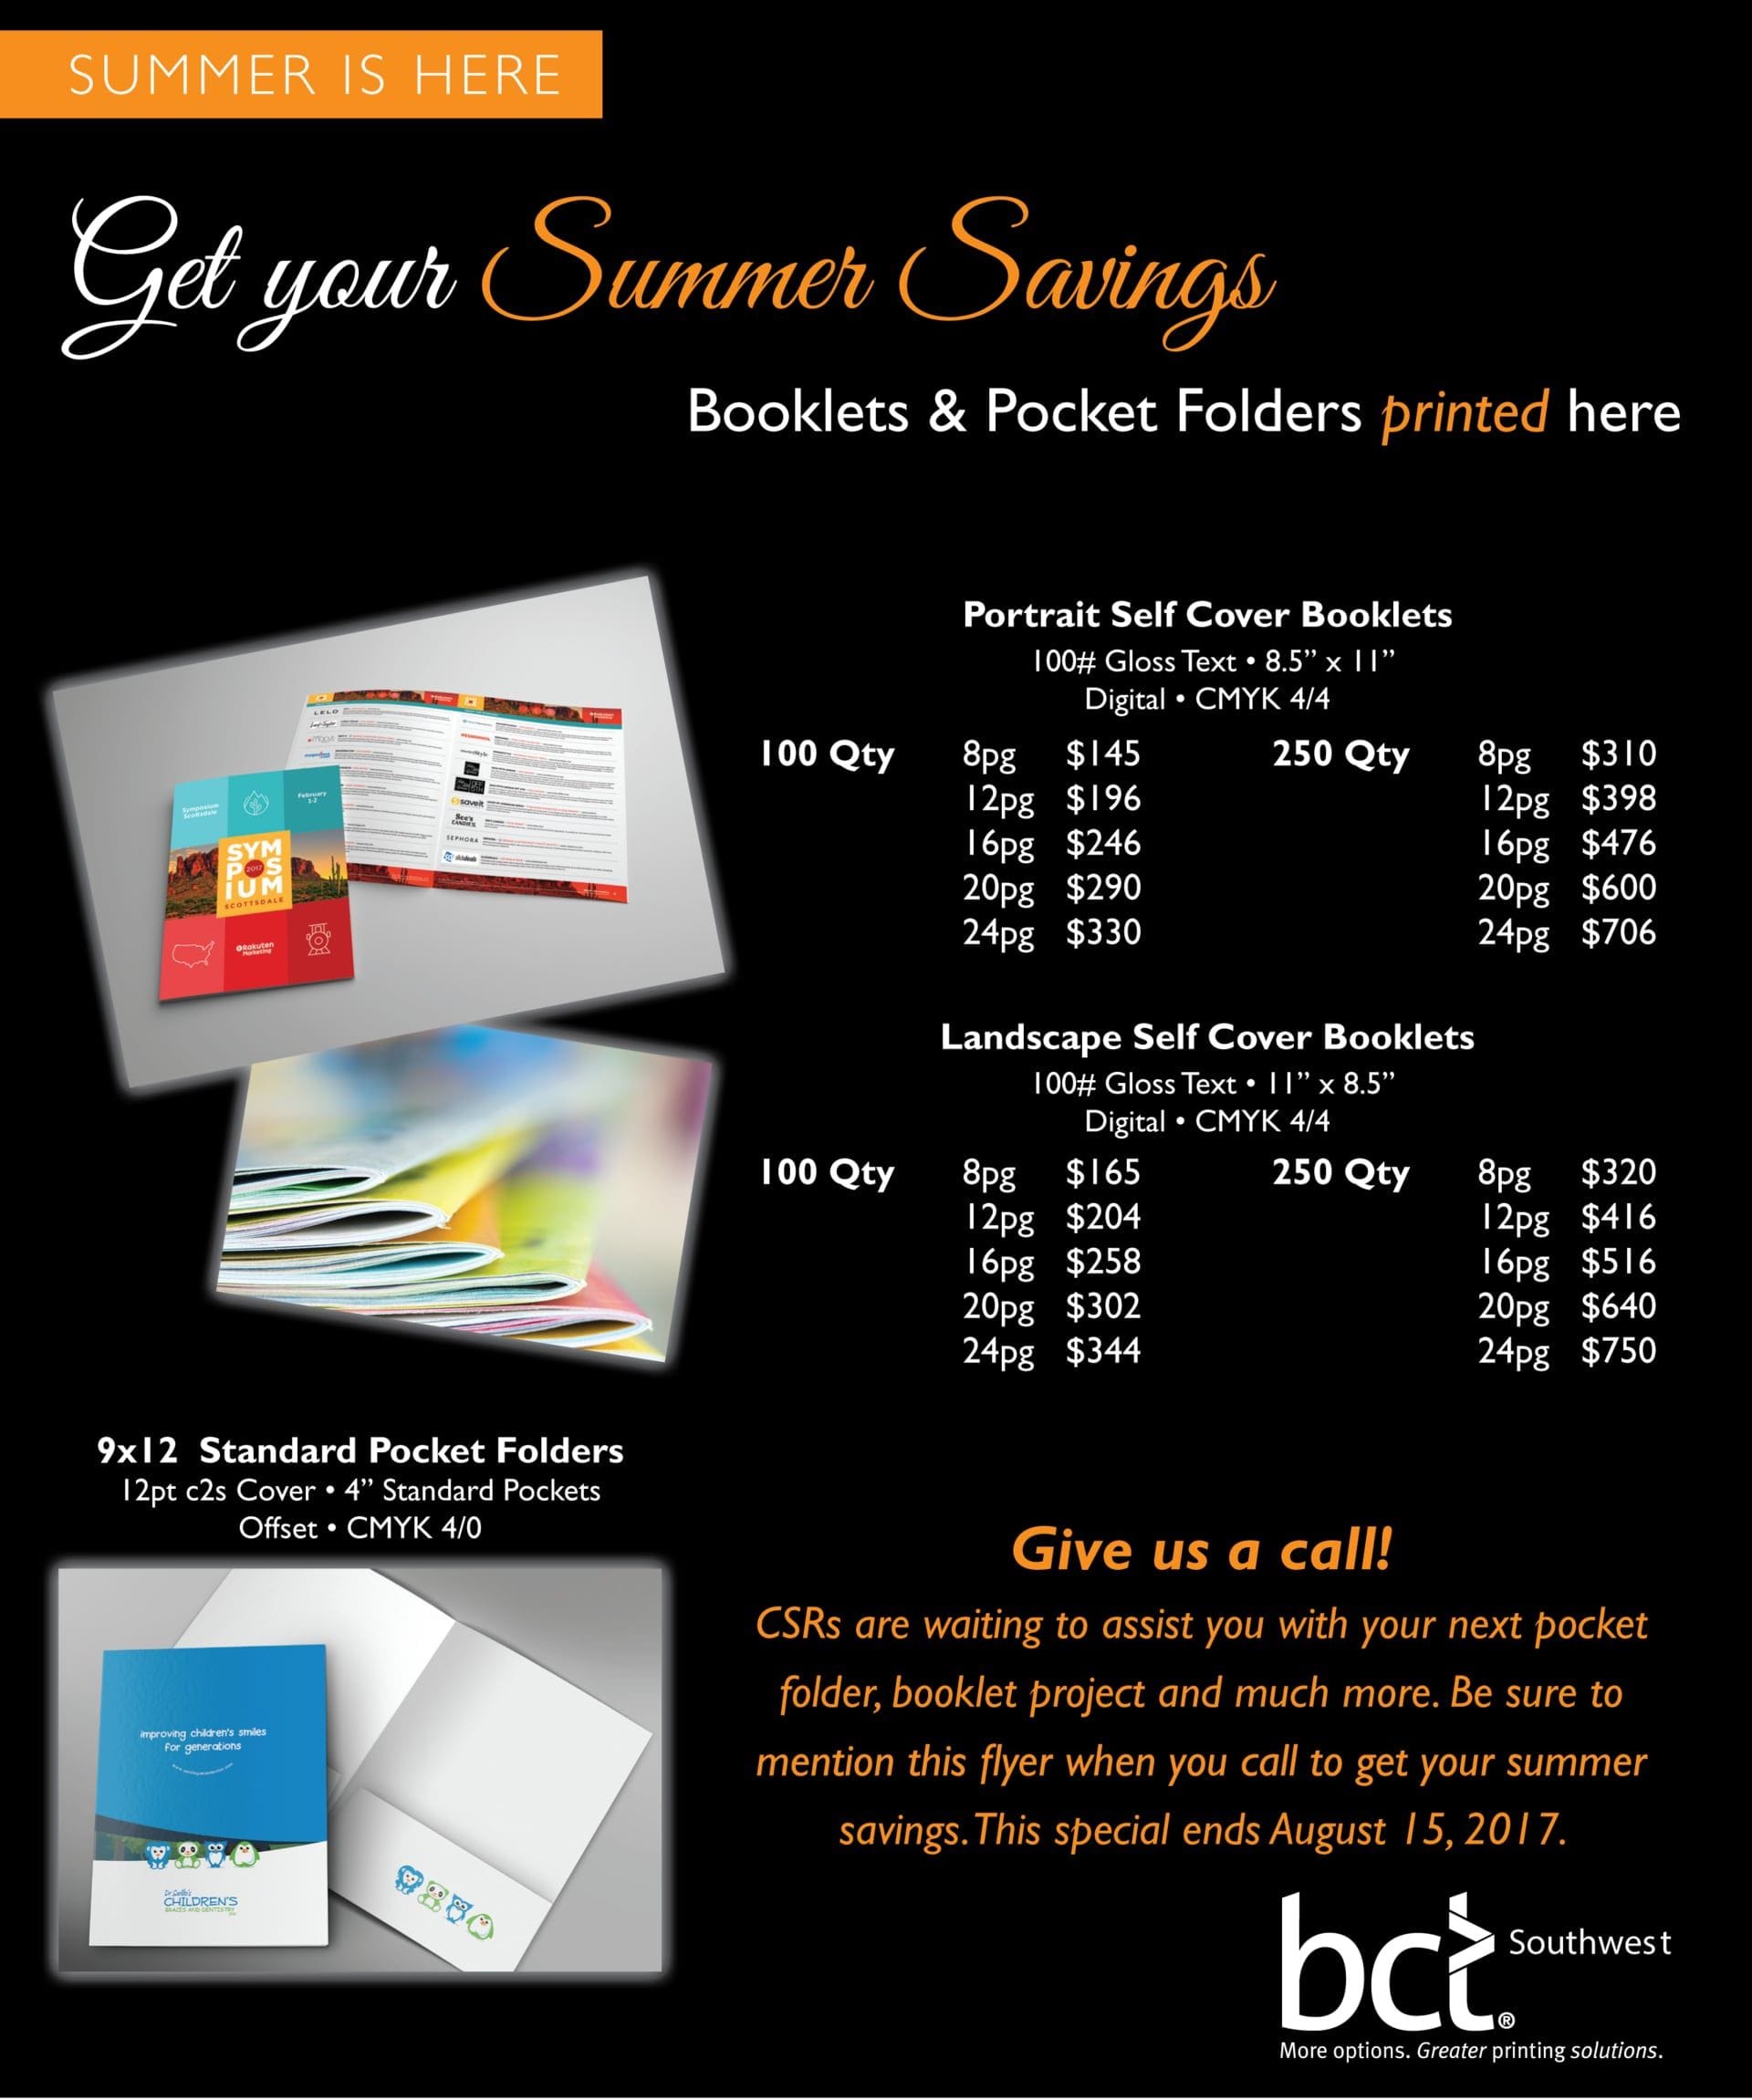 SUMMER IS HERE! Get your Summer Savings! Booklets & Pocket Folder printed here